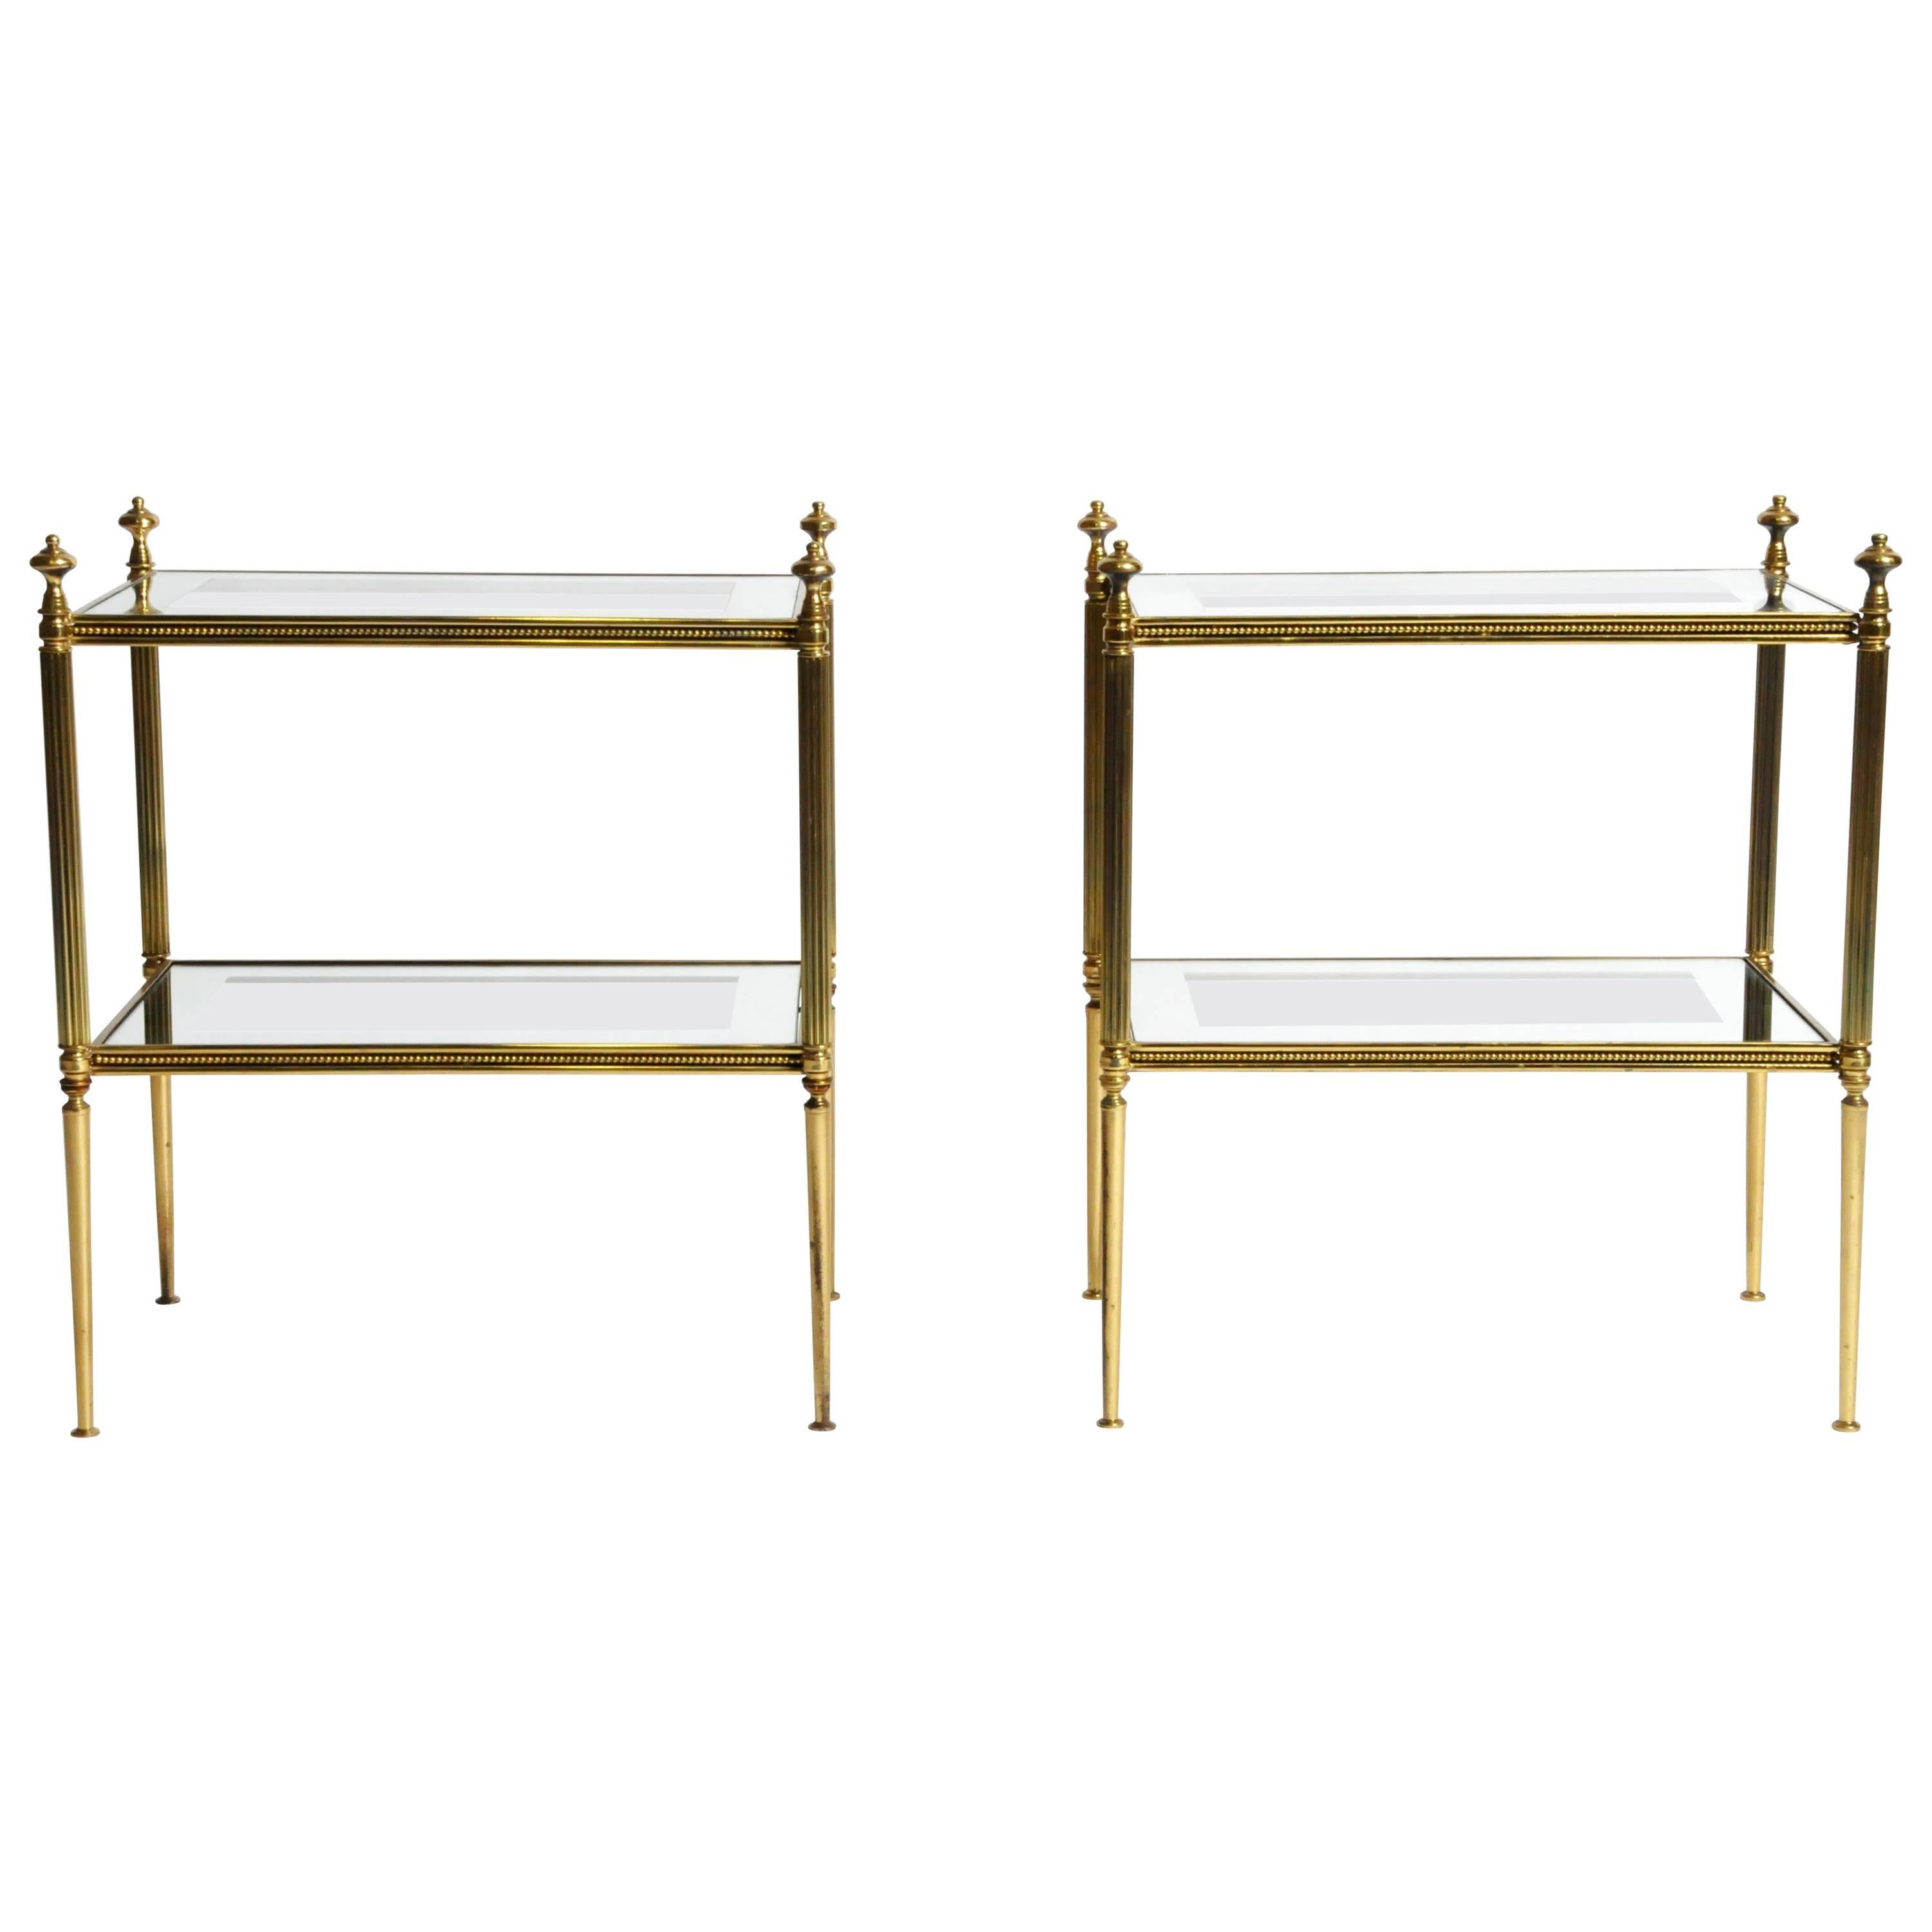 Pair of French Mid-Century Modern Side Tables with Mirrored Glass Shelves